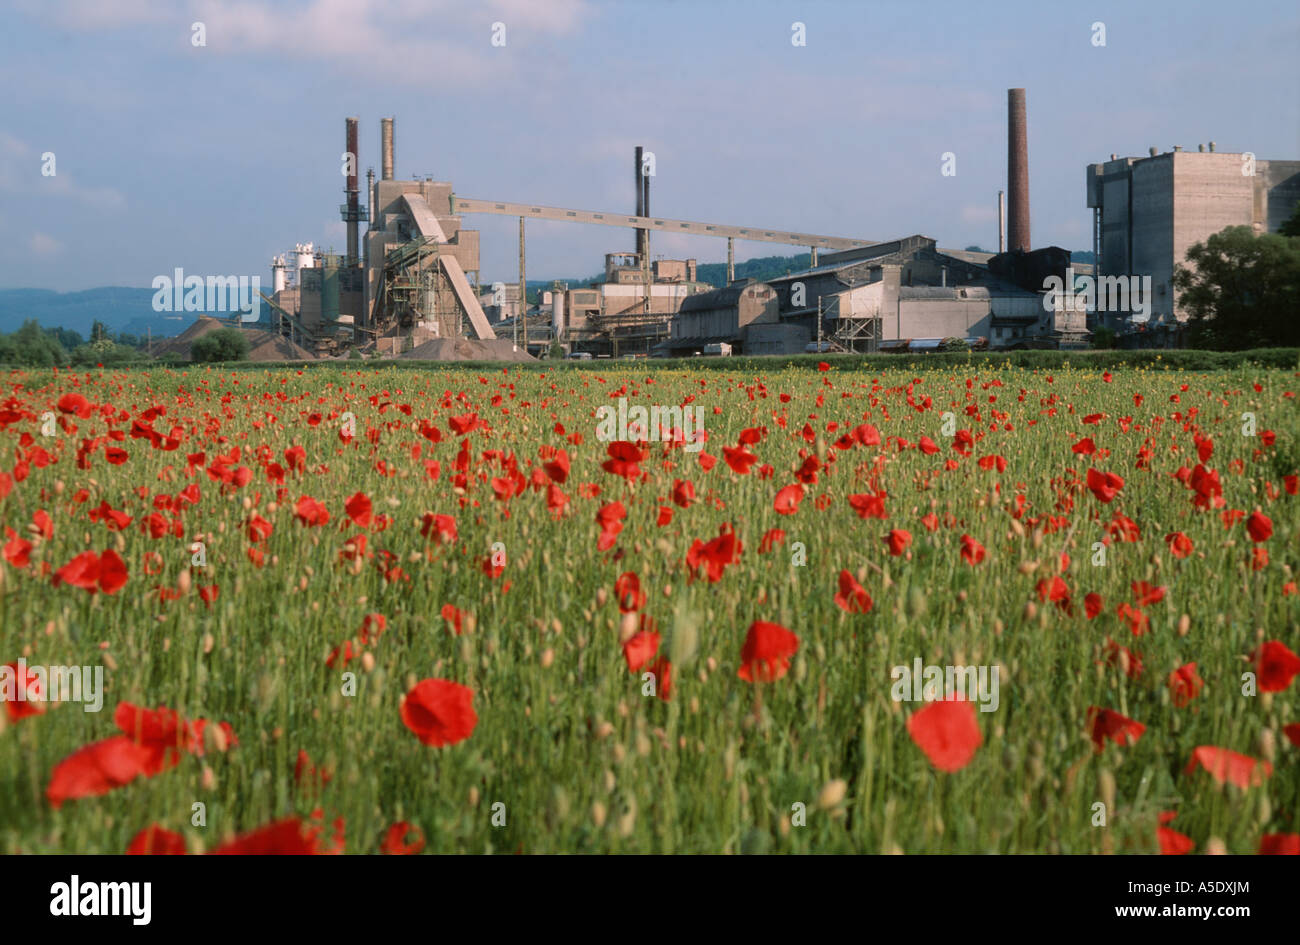 common poppy, corn poppy, red poppy (Papaver rhoeas), field with common poppy in front of a cement work, Germany, North Rhine-W Stock Photo